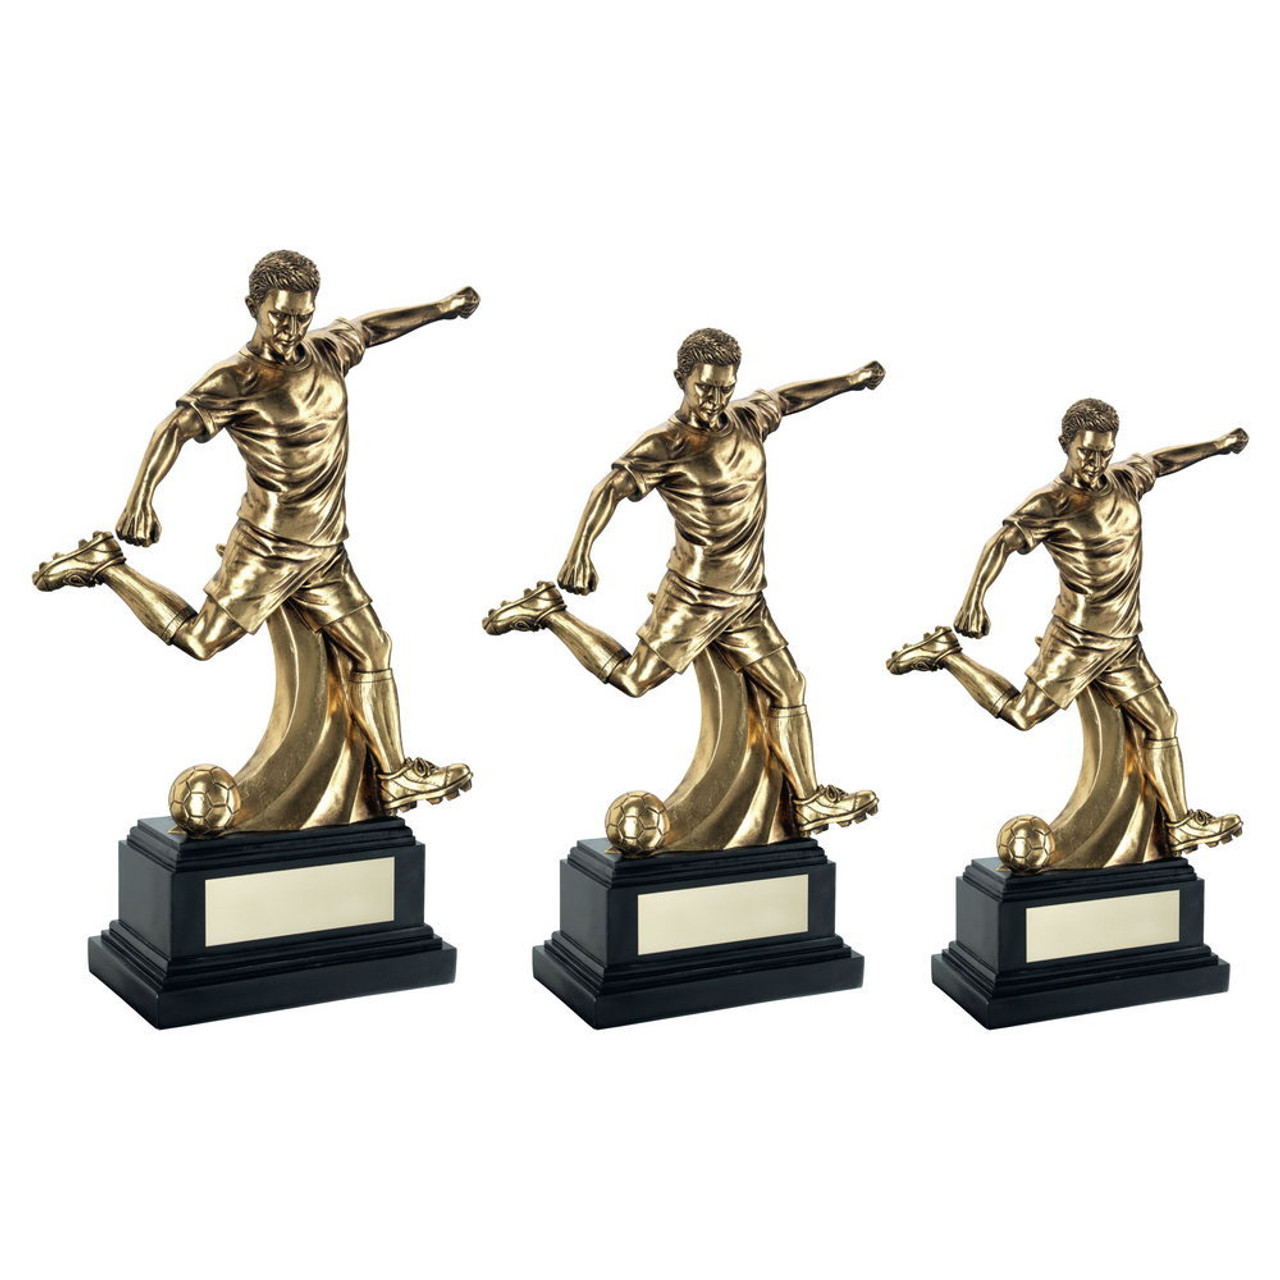 ANTIQUE GOLD PREMIUM MALE FOOTBALL FIGURE ON BLACK BASE AVAILABLE IN 3 SIZES